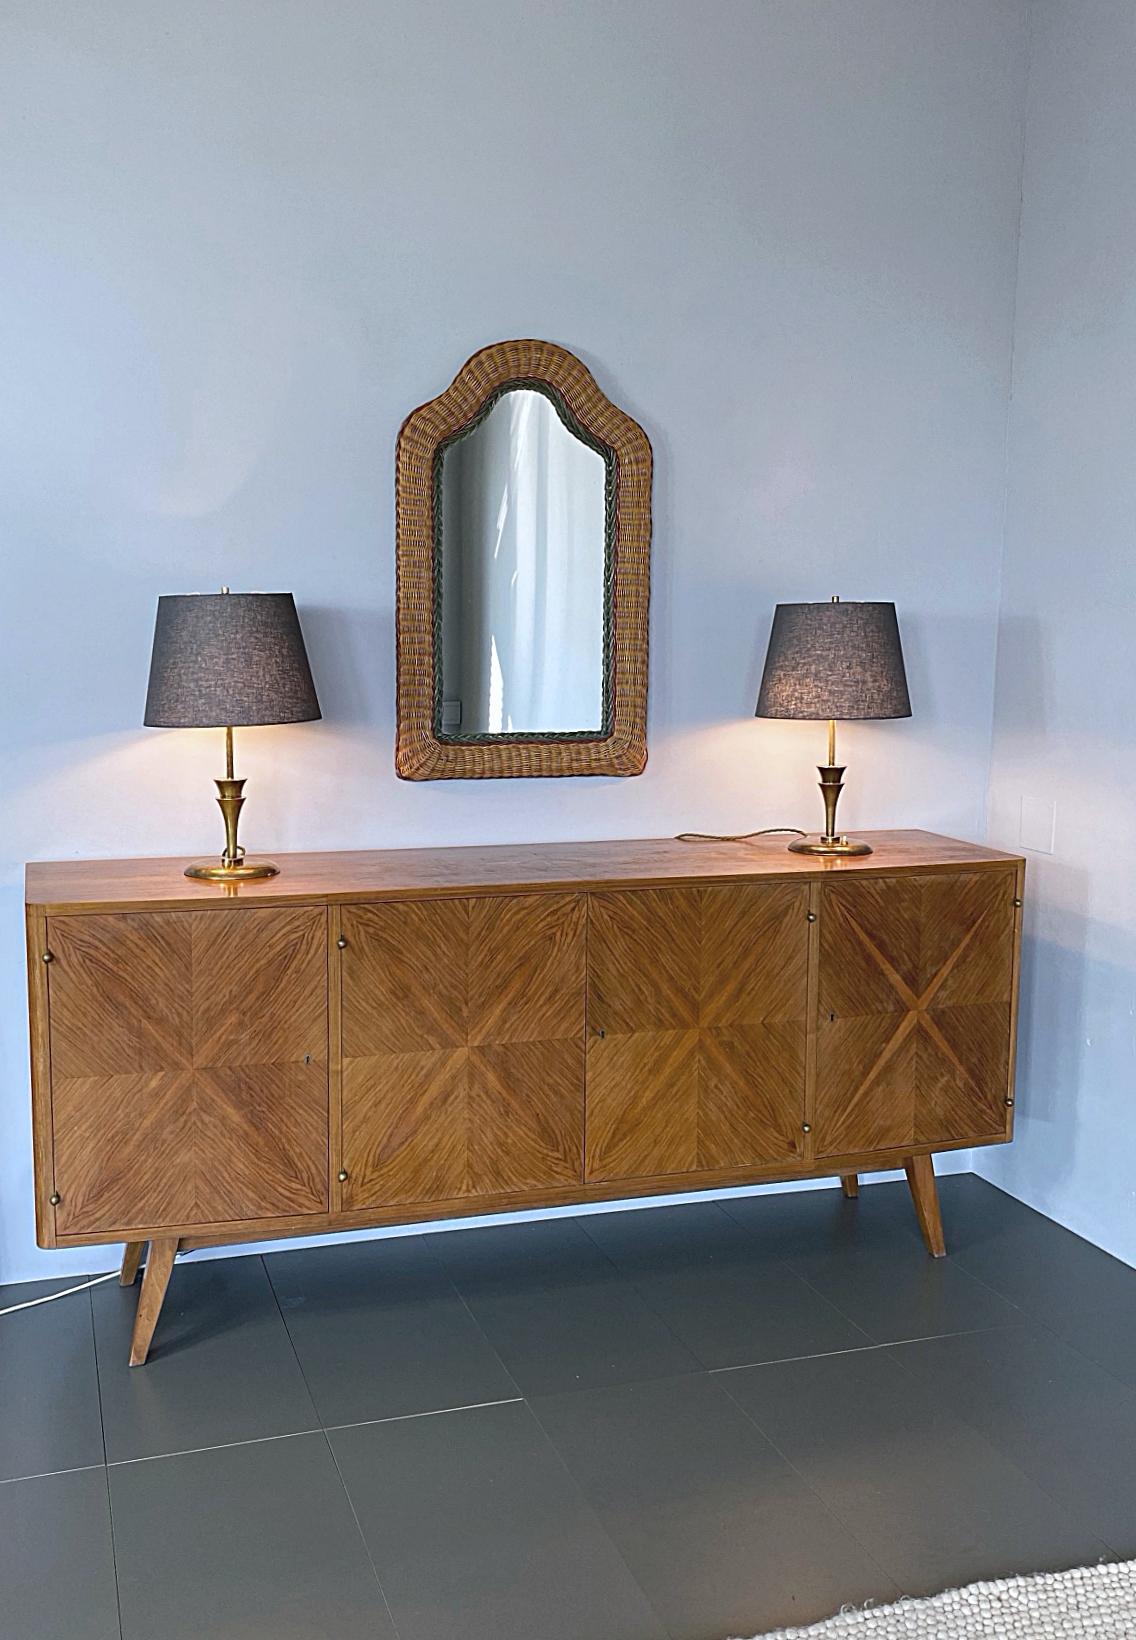 Mid-20th Century Artisanal Wicker Rattan Midcentury Arched Wall Mirror, 1960s, France